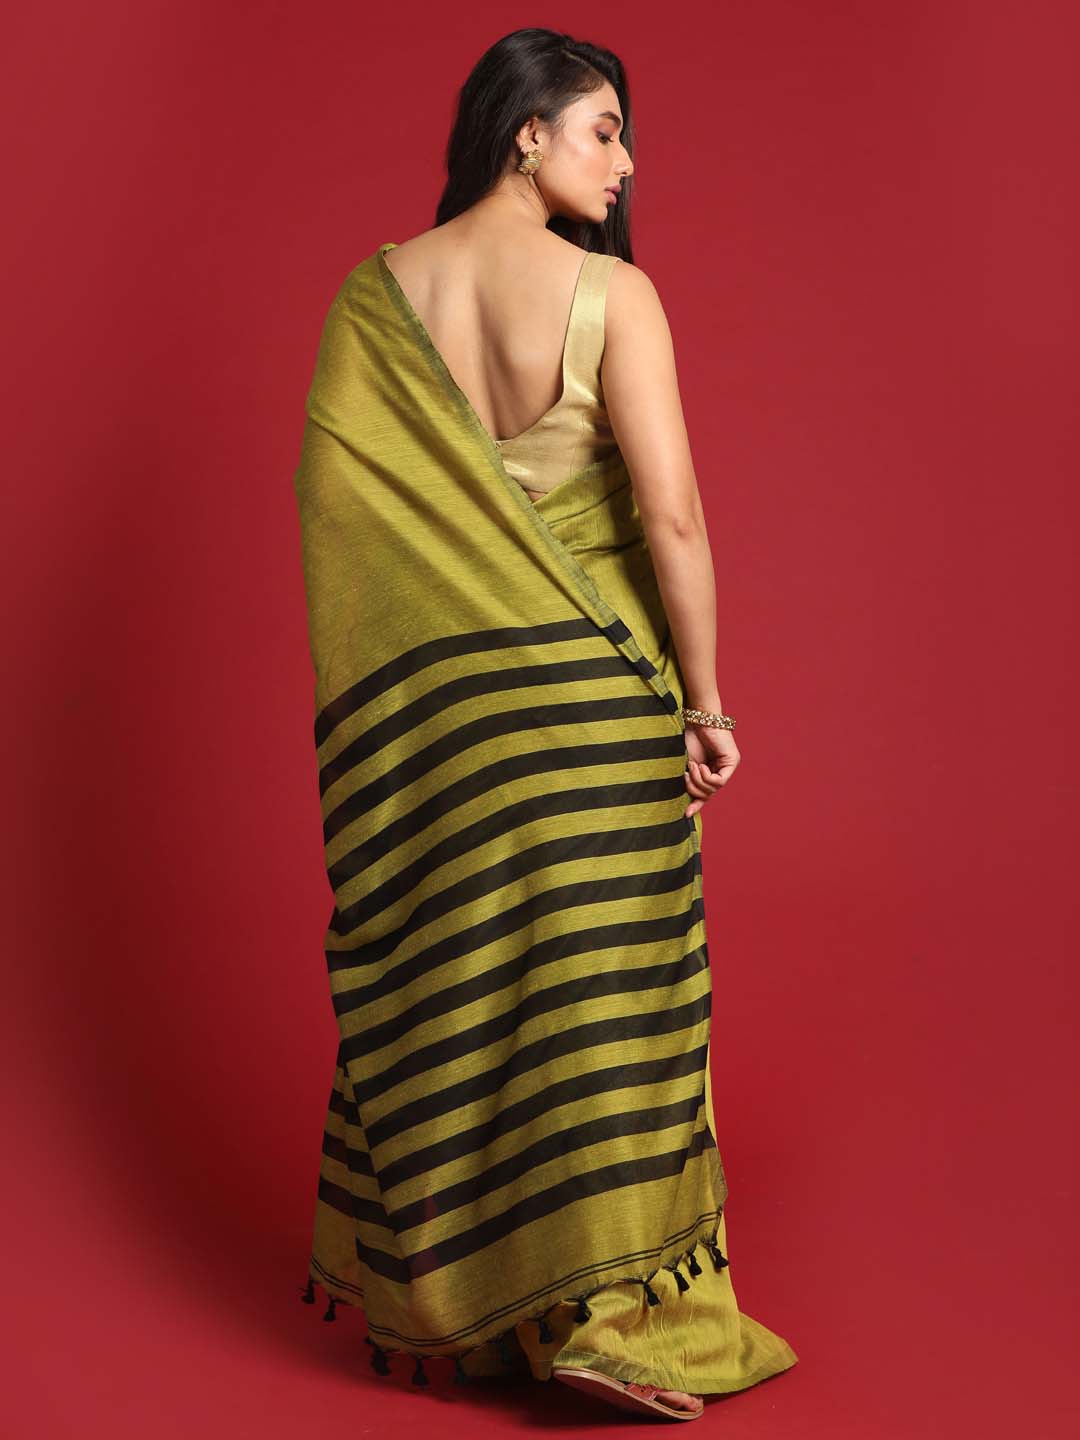 Indethnic Olive saree with Black Striped Pleats and Pallu - View 3